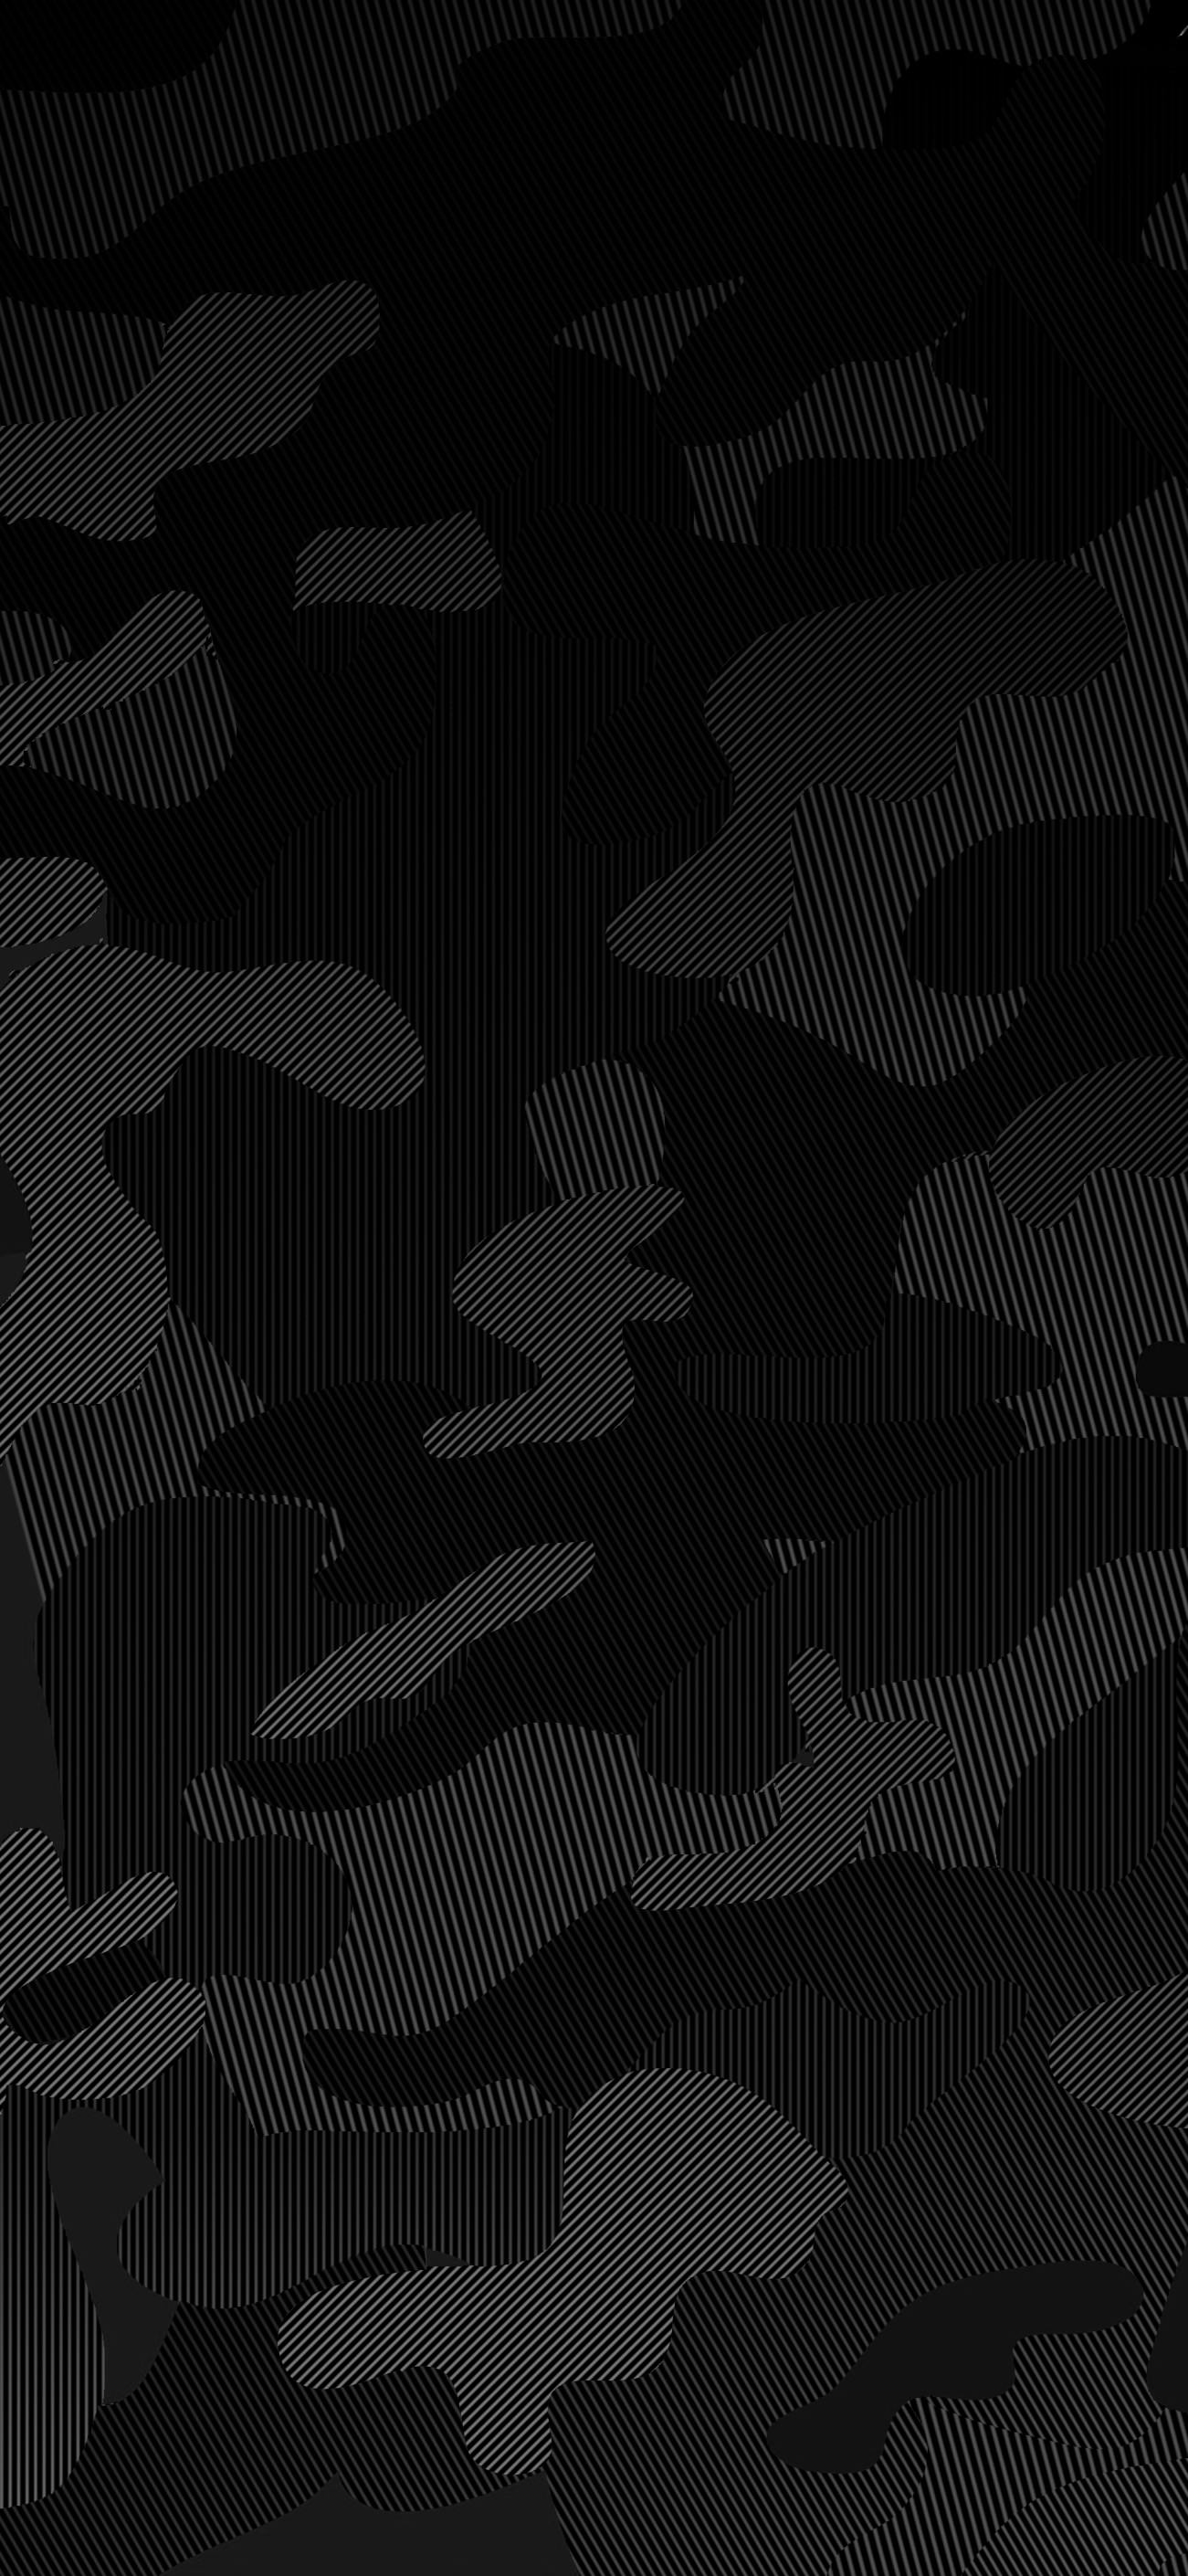 looking for wallpaper of black camo